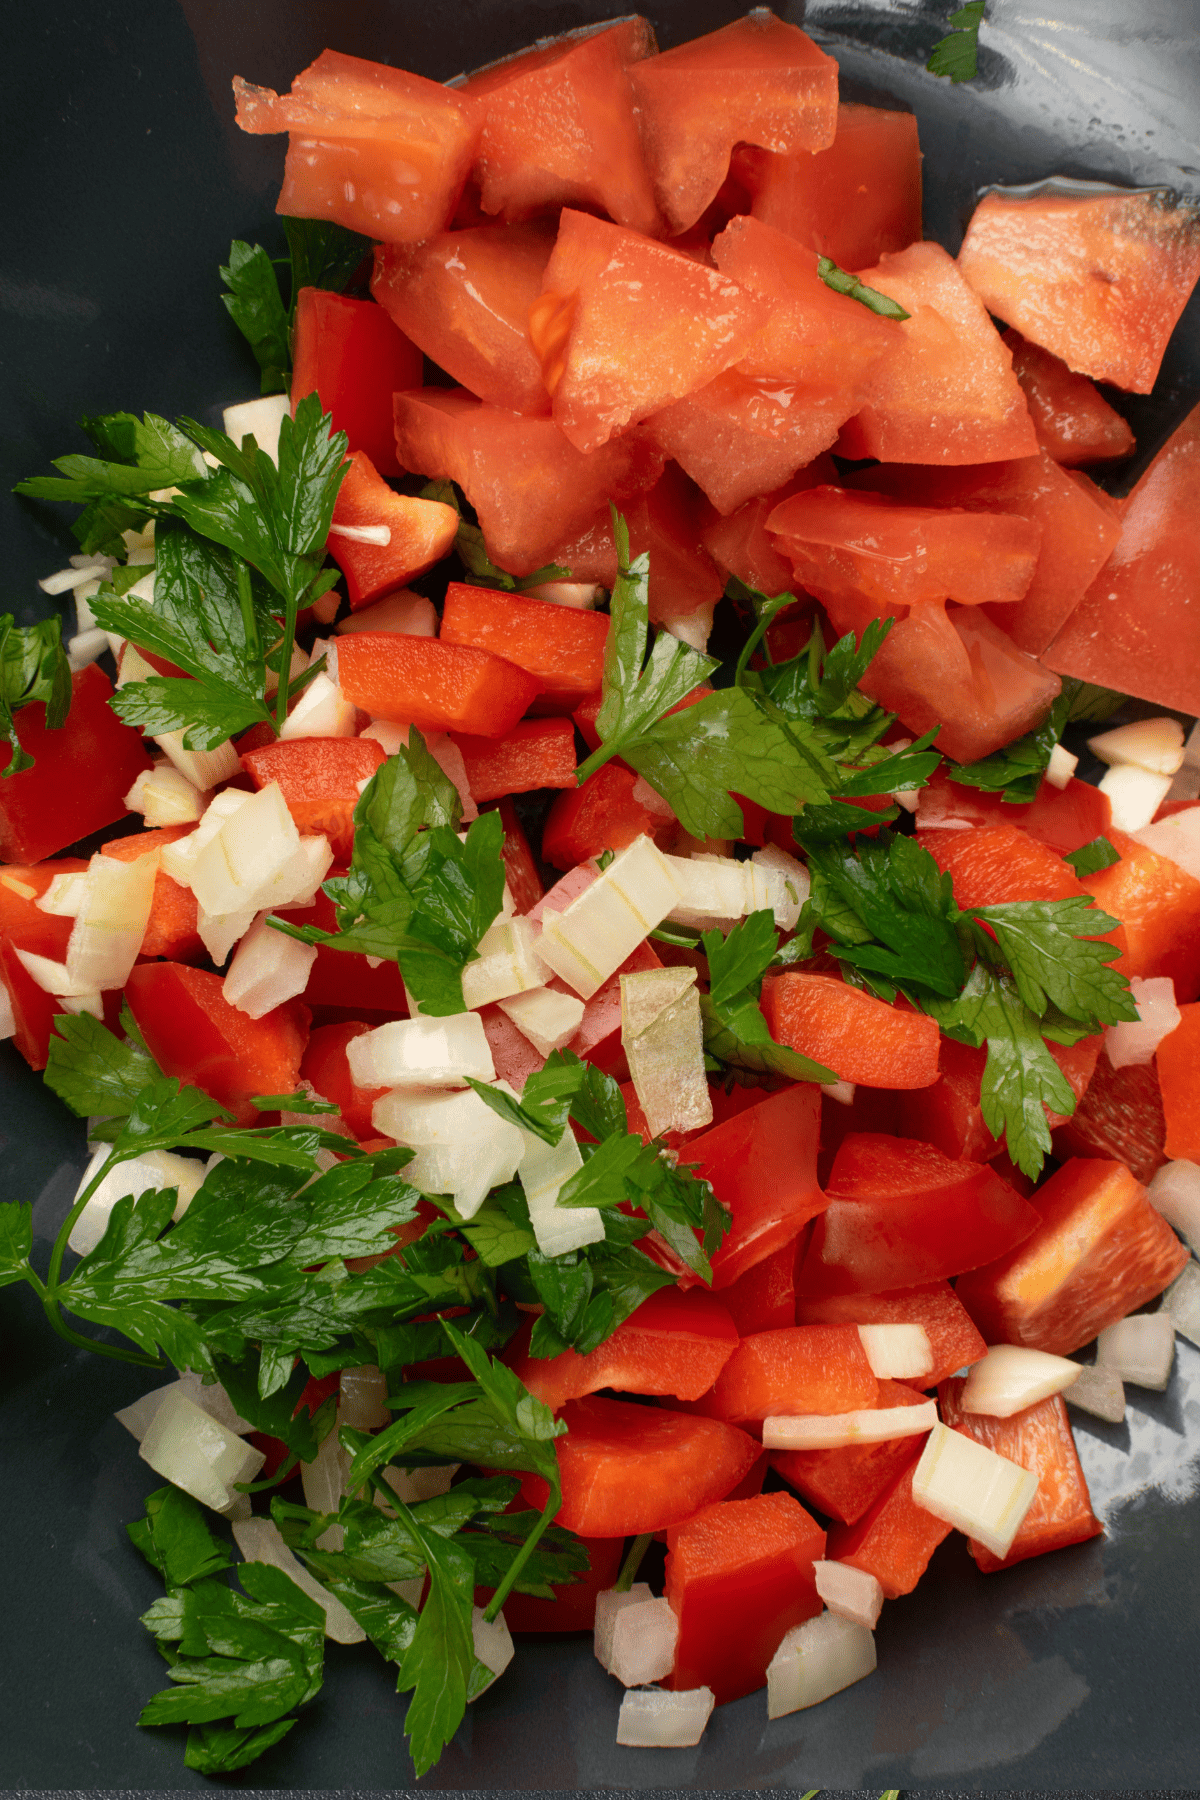 chopped vegetables in a pan.